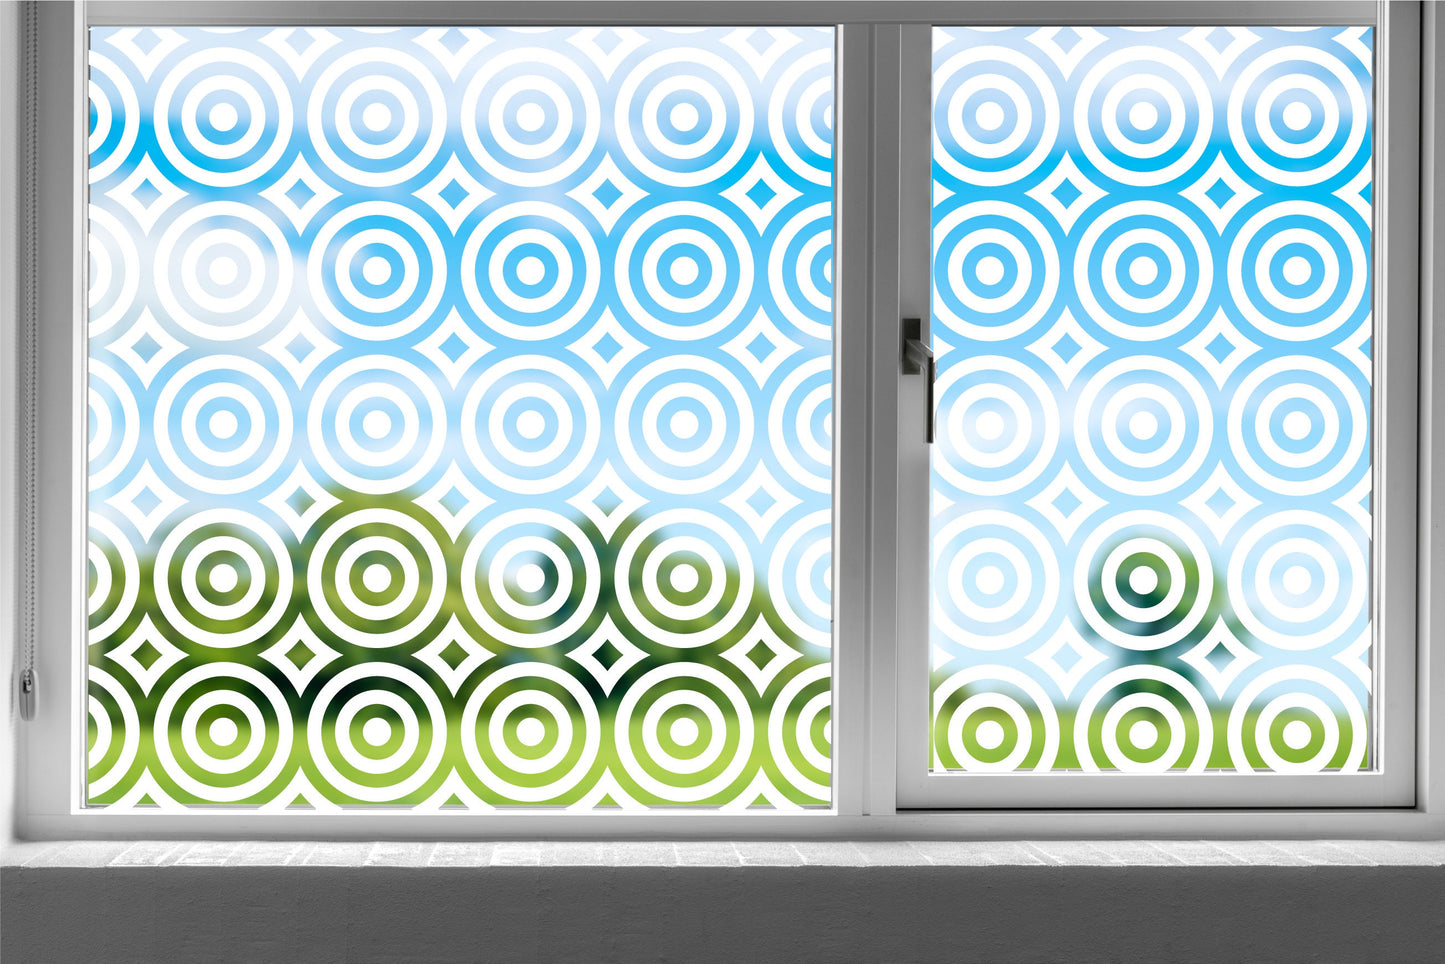 Decorative Circles Pattern Window Privacy Film Cling Static Cling Glass Sticker Non Adhesive UV Heat Control Frosted Glass